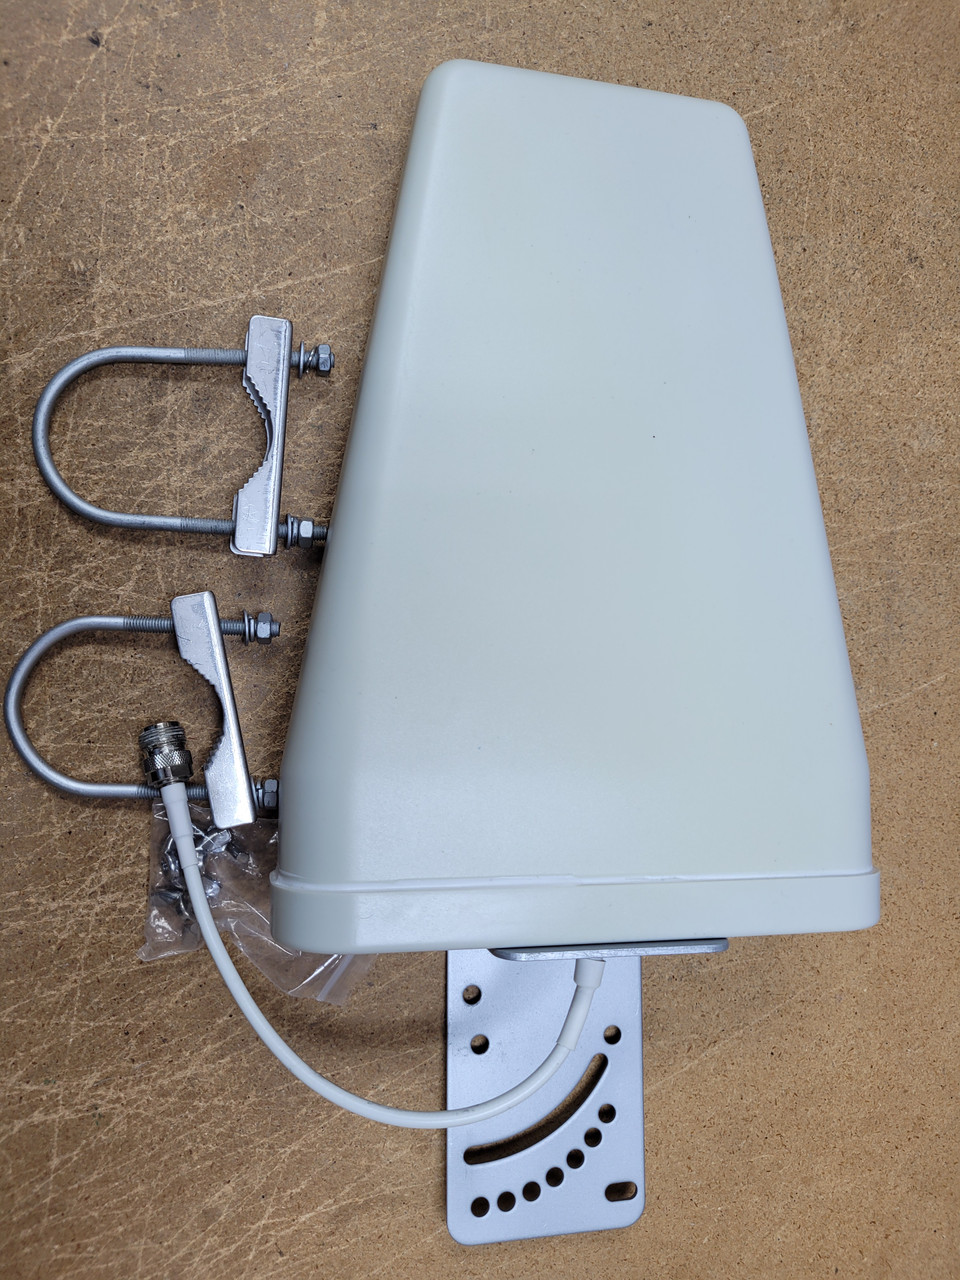 Lg Antennahigh-gain 12dbi 4g Lte Antenna With Sma Connector For Router  Modem